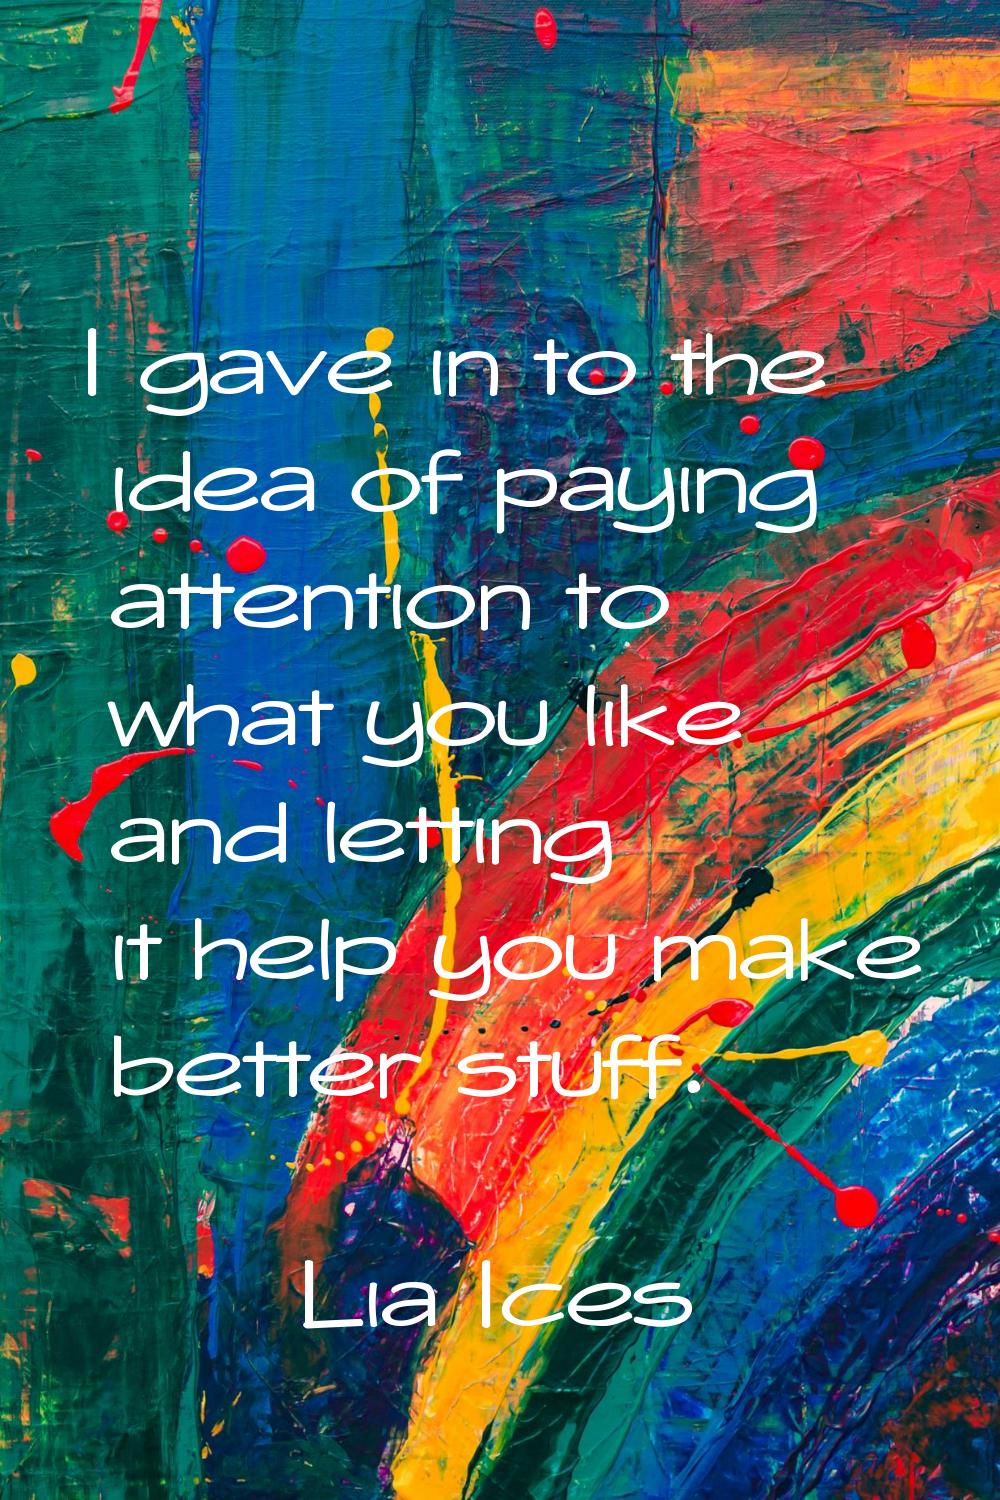 I gave in to the idea of paying attention to what you like and letting it help you make better stuf